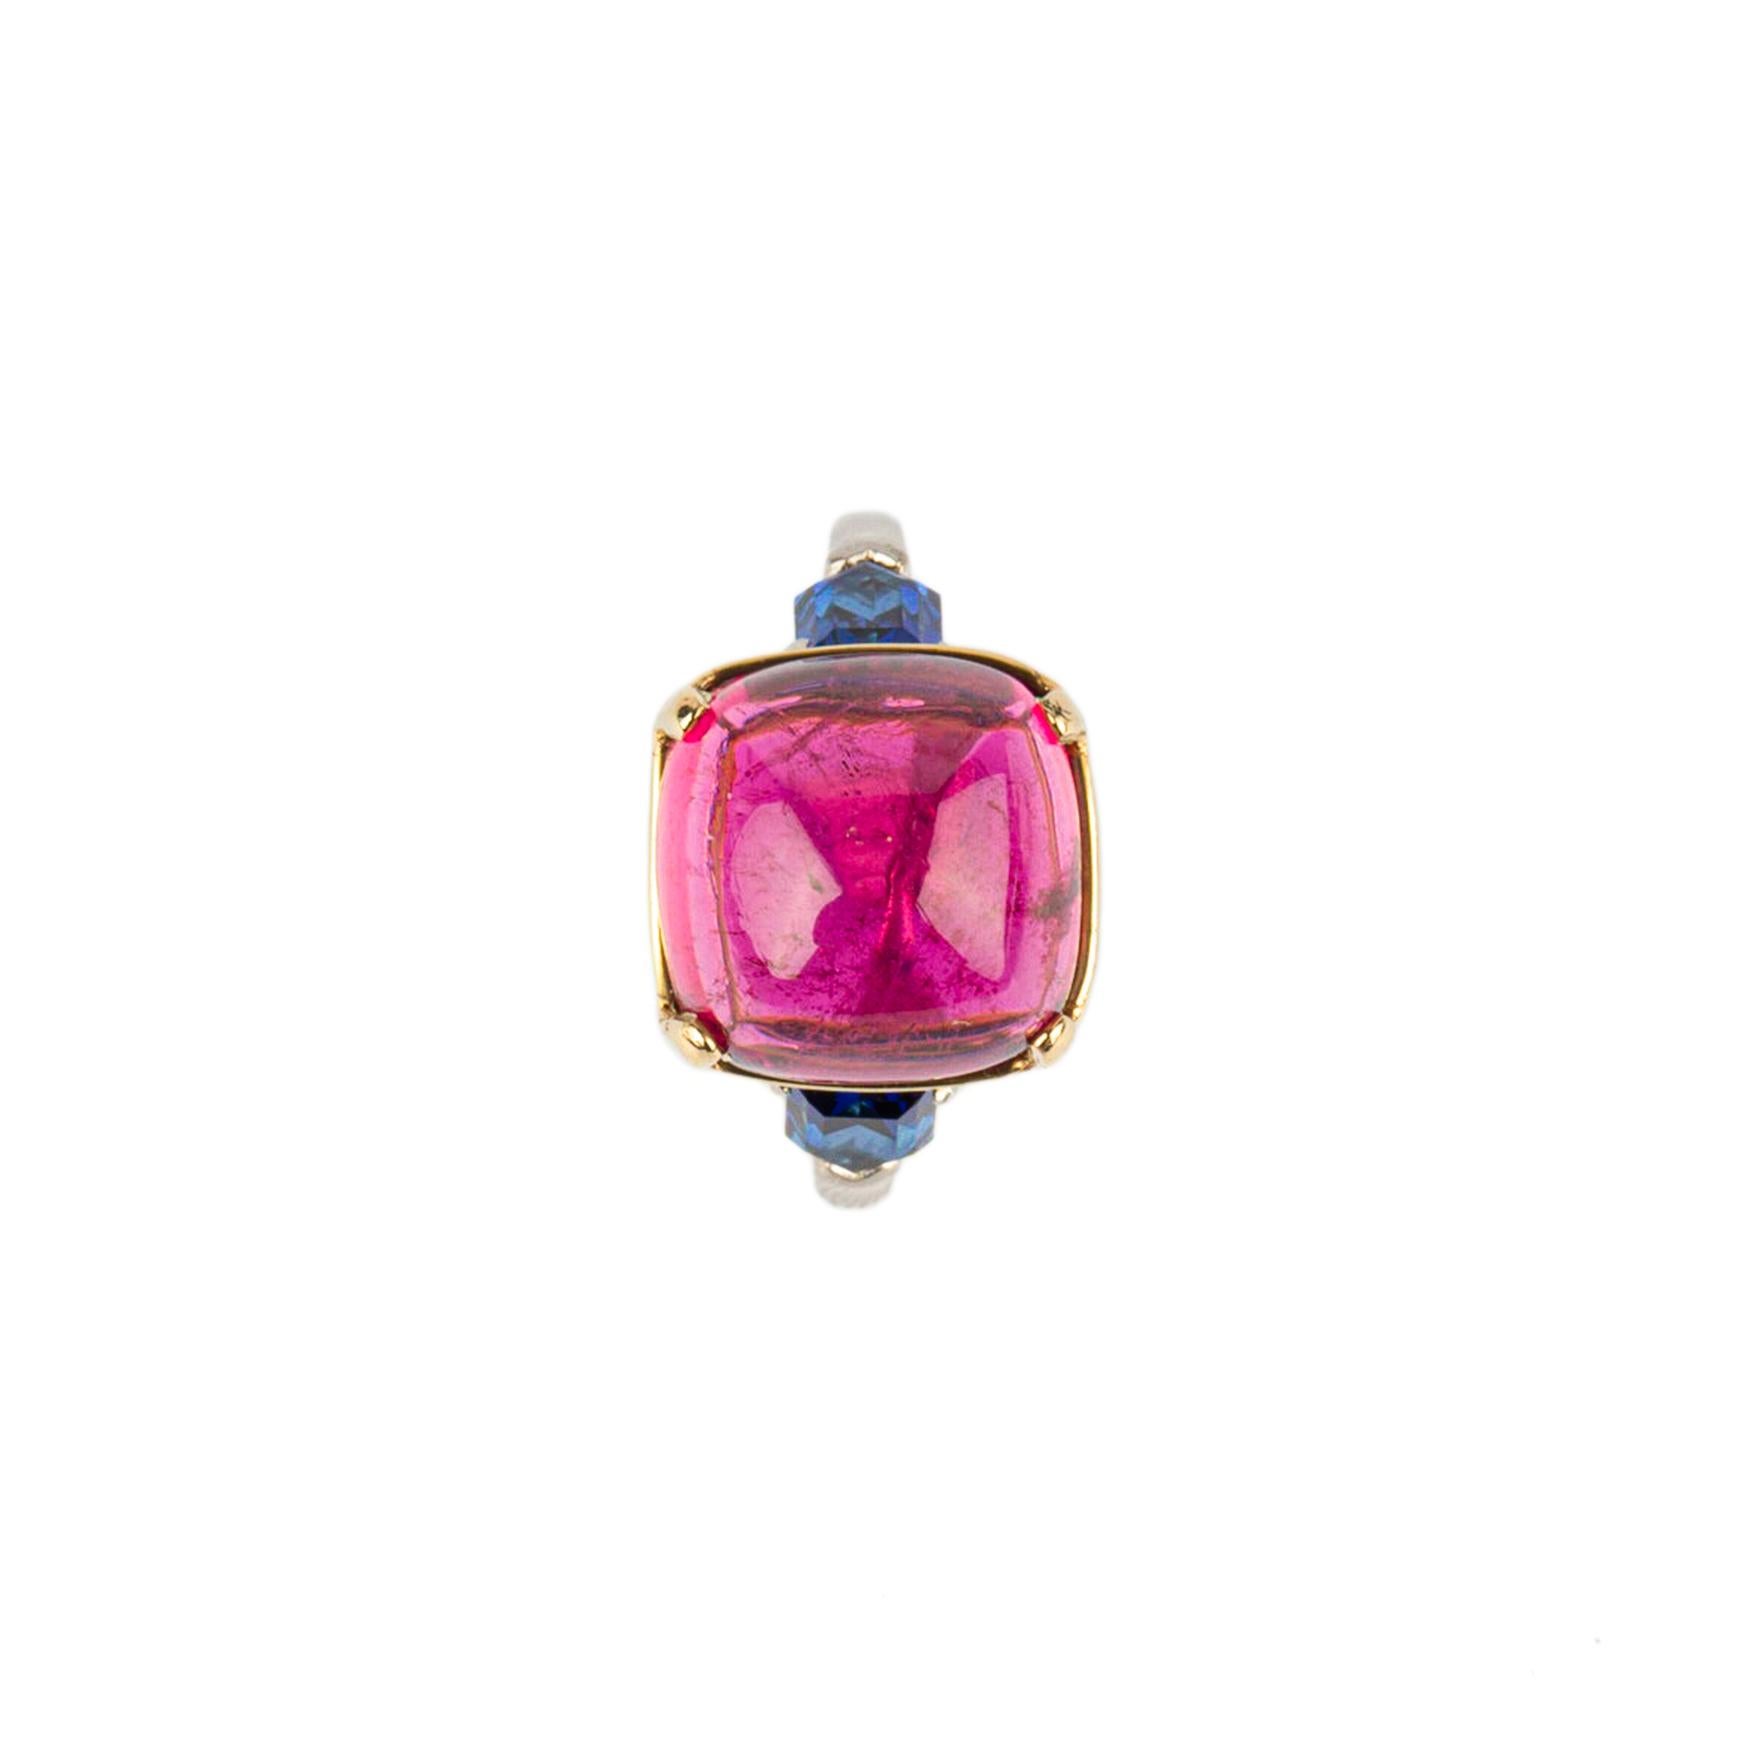 Bulgari Tourmaline (10.90 cts) and bullet cut sapphires (1.51 cts) ring in 18k yellow and white Gold. Made in Italy. Circa 1980